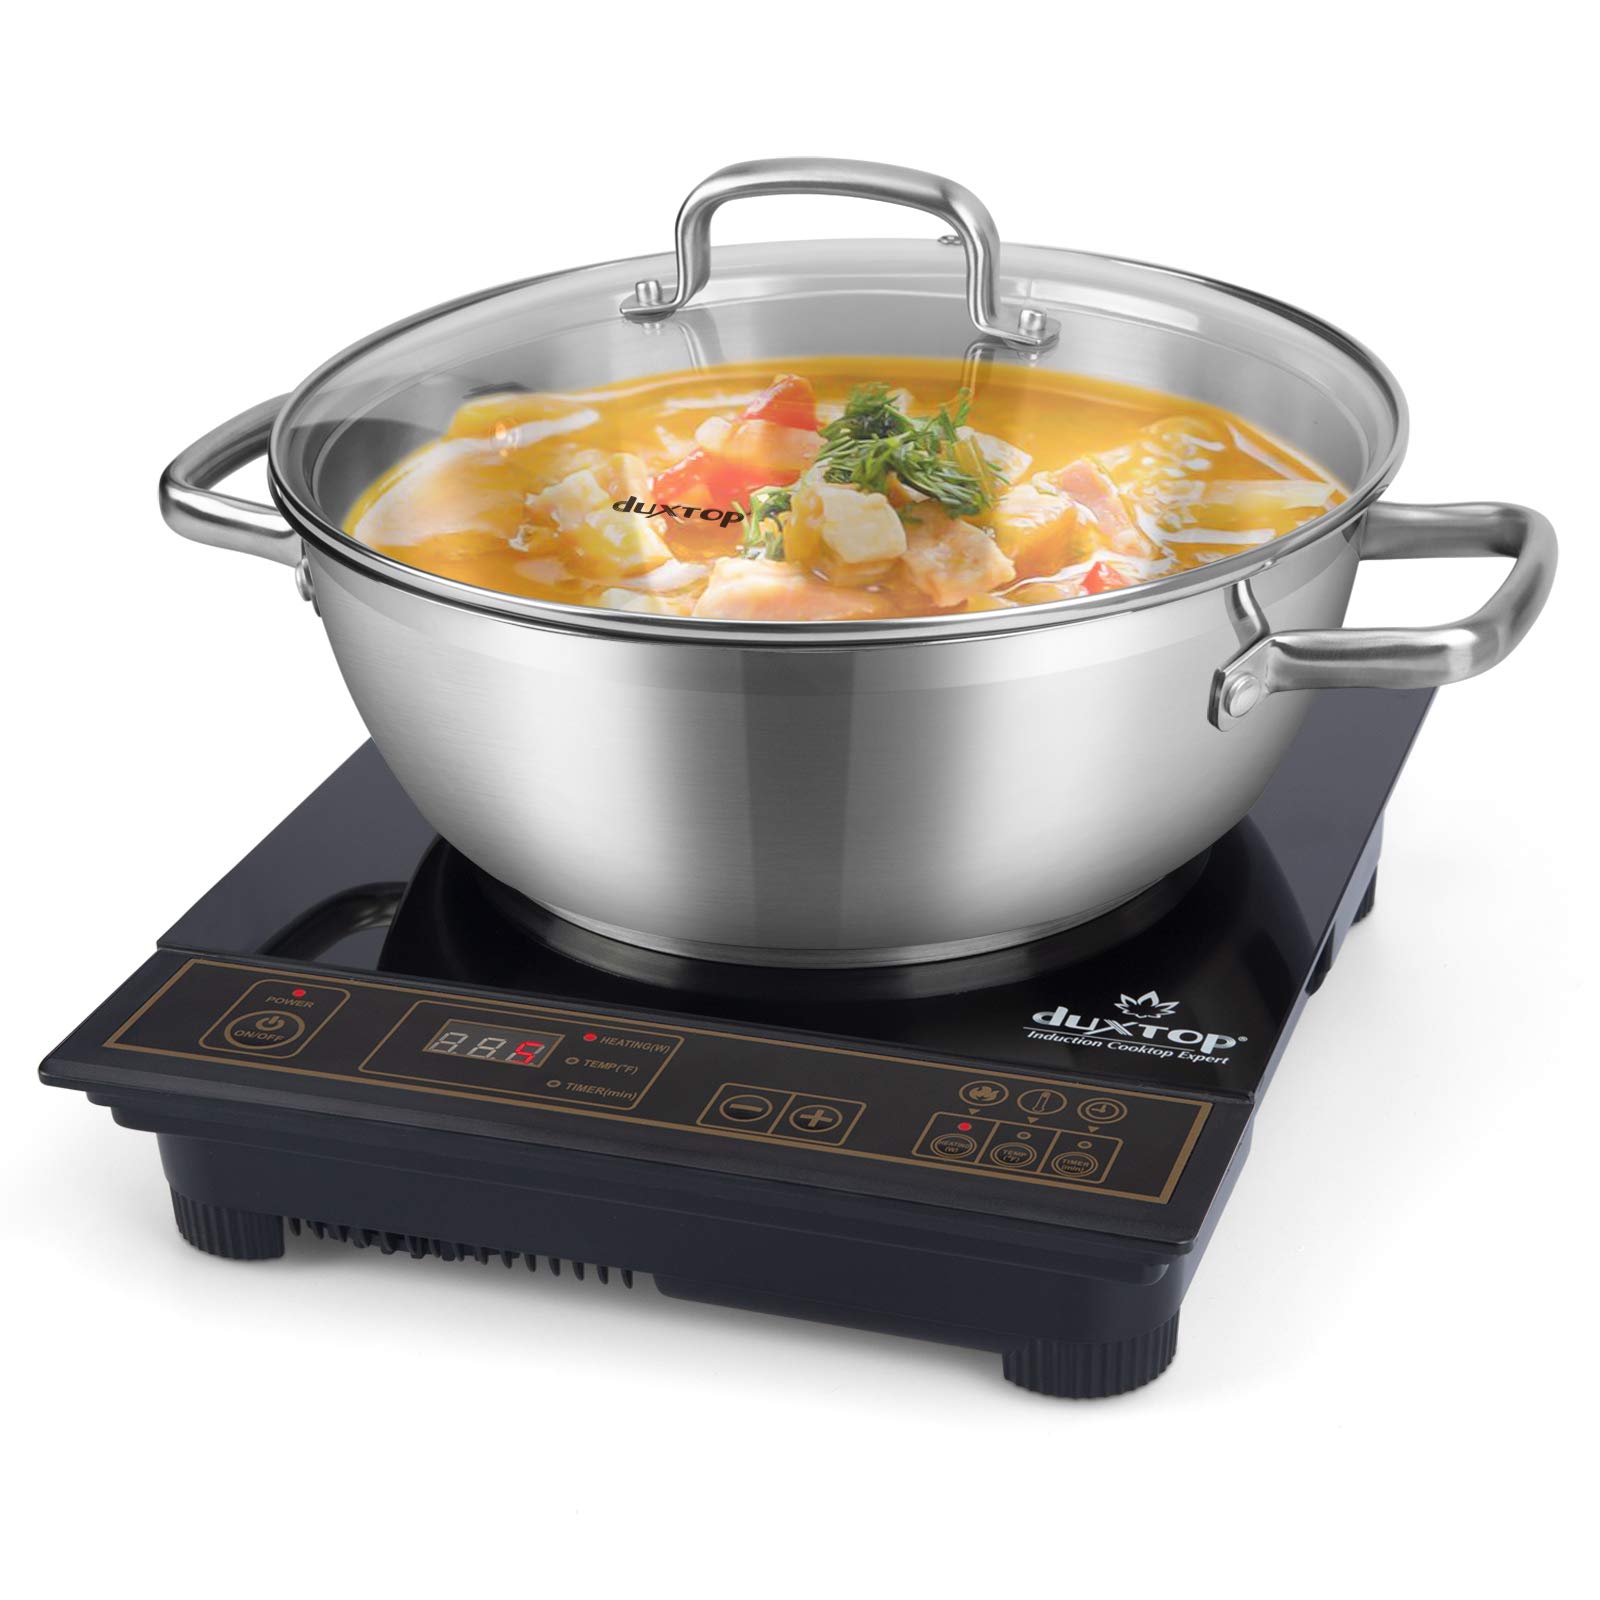 Induction Cooking Pot